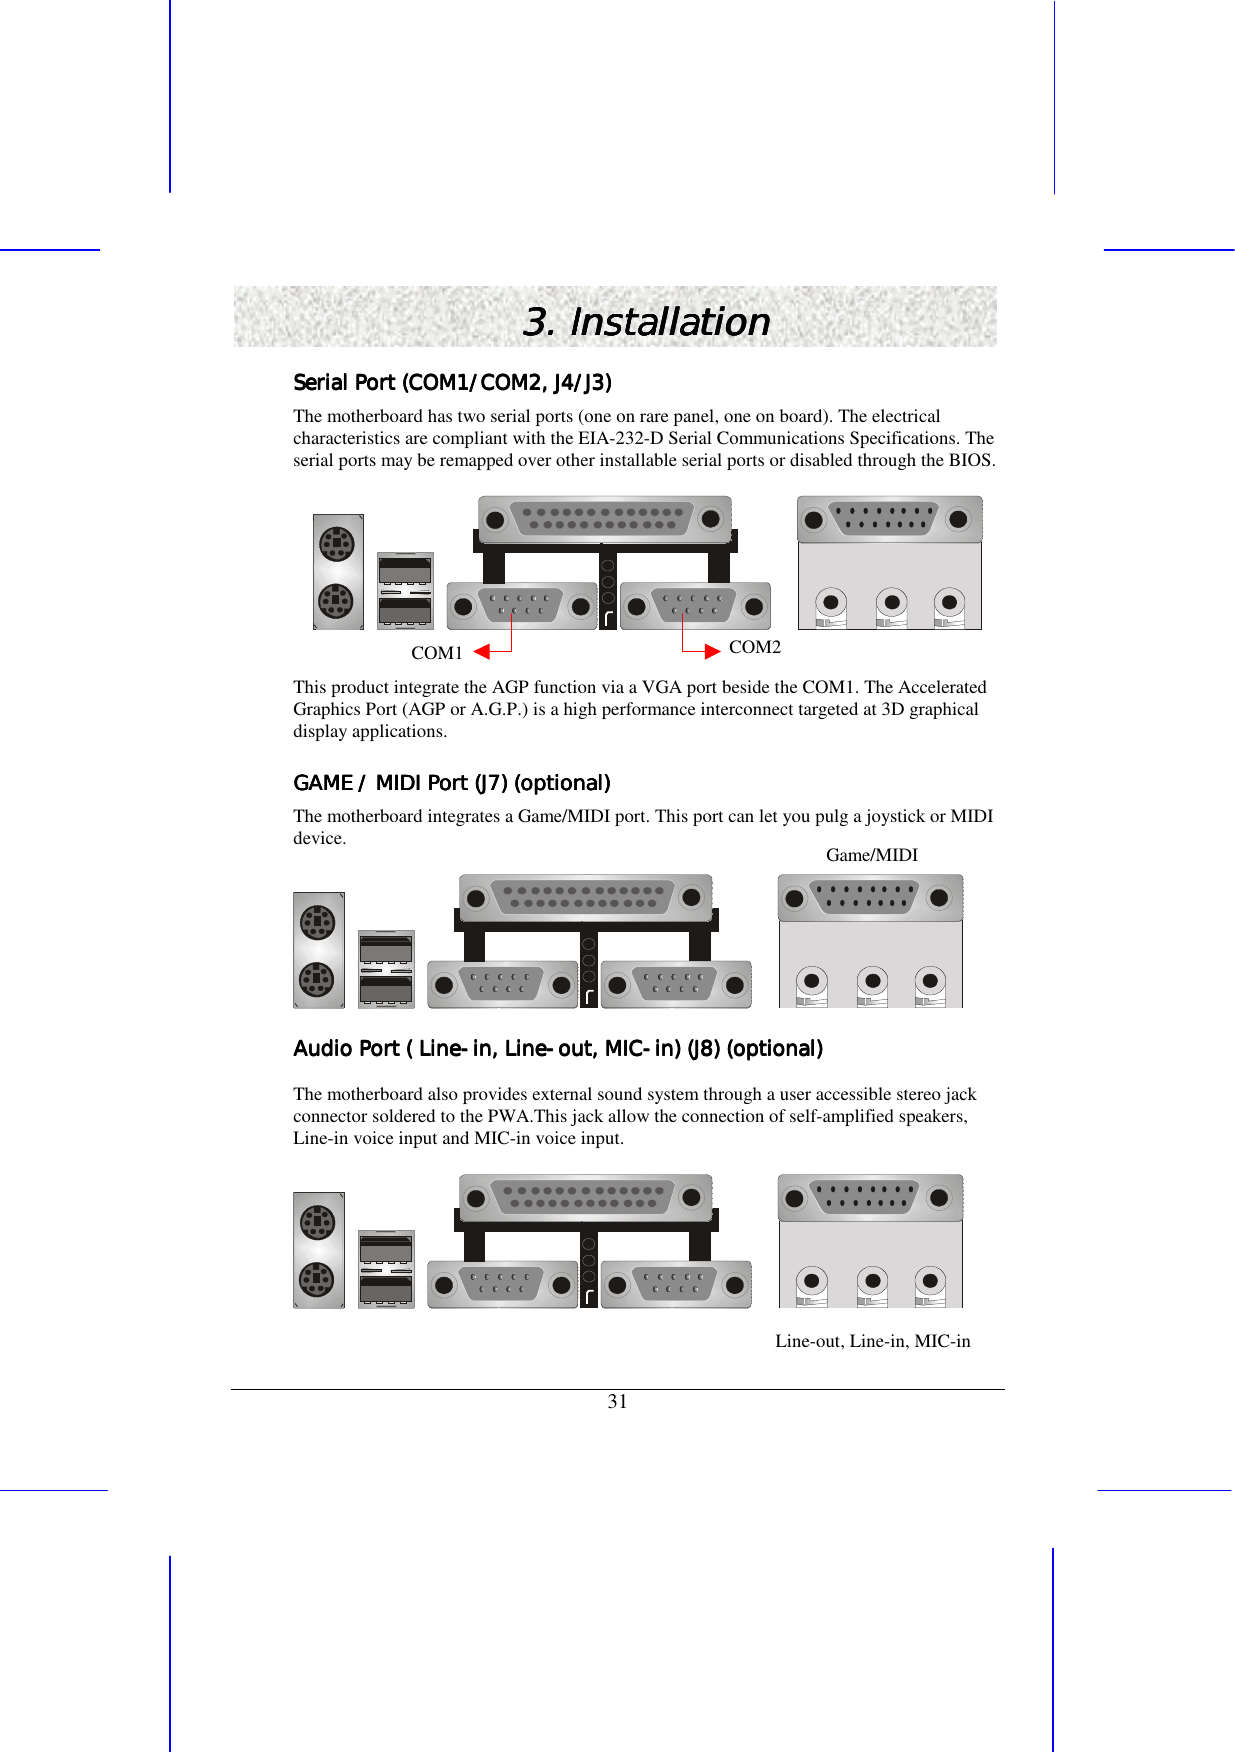   31 3. Installation3. Installation3. Installation3. Installation    Serial Port (COM1/COM2, J4/J3)Serial Port (COM1/COM2, J4/J3)Serial Port (COM1/COM2, J4/J3)Serial Port (COM1/COM2, J4/J3)    The motherboard has two serial ports (one on rare panel, one on board). The electrical characteristics are compliant with the EIA-232-D Serial Communications Specifications. The serial ports may be remapped over other installable serial ports or disabled through the BIOS.  COM1 This product integrate the AGP function via a VGA port beside the COM1. The Accelerated Graphics Port (AGP or A.G.P.) is a high performance interconnect targeted at 3D graphical display applications. GAME / MIDI Port (J7) (optional)GAME / MIDI Port (J7) (optional)GAME / MIDI Port (J7) (optional)GAME / MIDI Port (J7) (optional)    The motherboard integrates a Game/MIDI port. This port can let you pulg a joystick or MIDI device.  Audio Port ( LineAudio Port ( LineAudio Port ( LineAudio Port ( Line----in, Linein, Linein, Linein, Line----out, MICout, MICout, MICout, MIC----in)in)in)in) (J8) (optional) (J8) (optional) (J8) (optional) (J8) (optional)    The motherboard also provides external sound system through a user accessible stereo jack connector soldered to the PWA.This jack allow the connection of self-amplified speakers, Line-in voice input and MIC-in voice input.  COM2 Game/MIDI Line-out, Line-in, MIC-in 